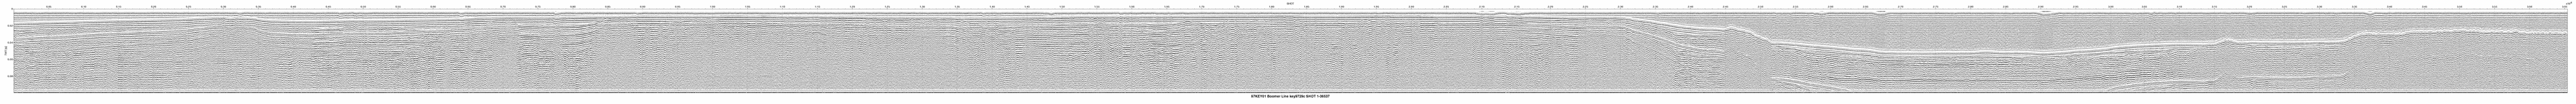 Thumbnail GIF image of the seismic trackline key9729c, with a hotlink to the more detailed, larger JPG image.